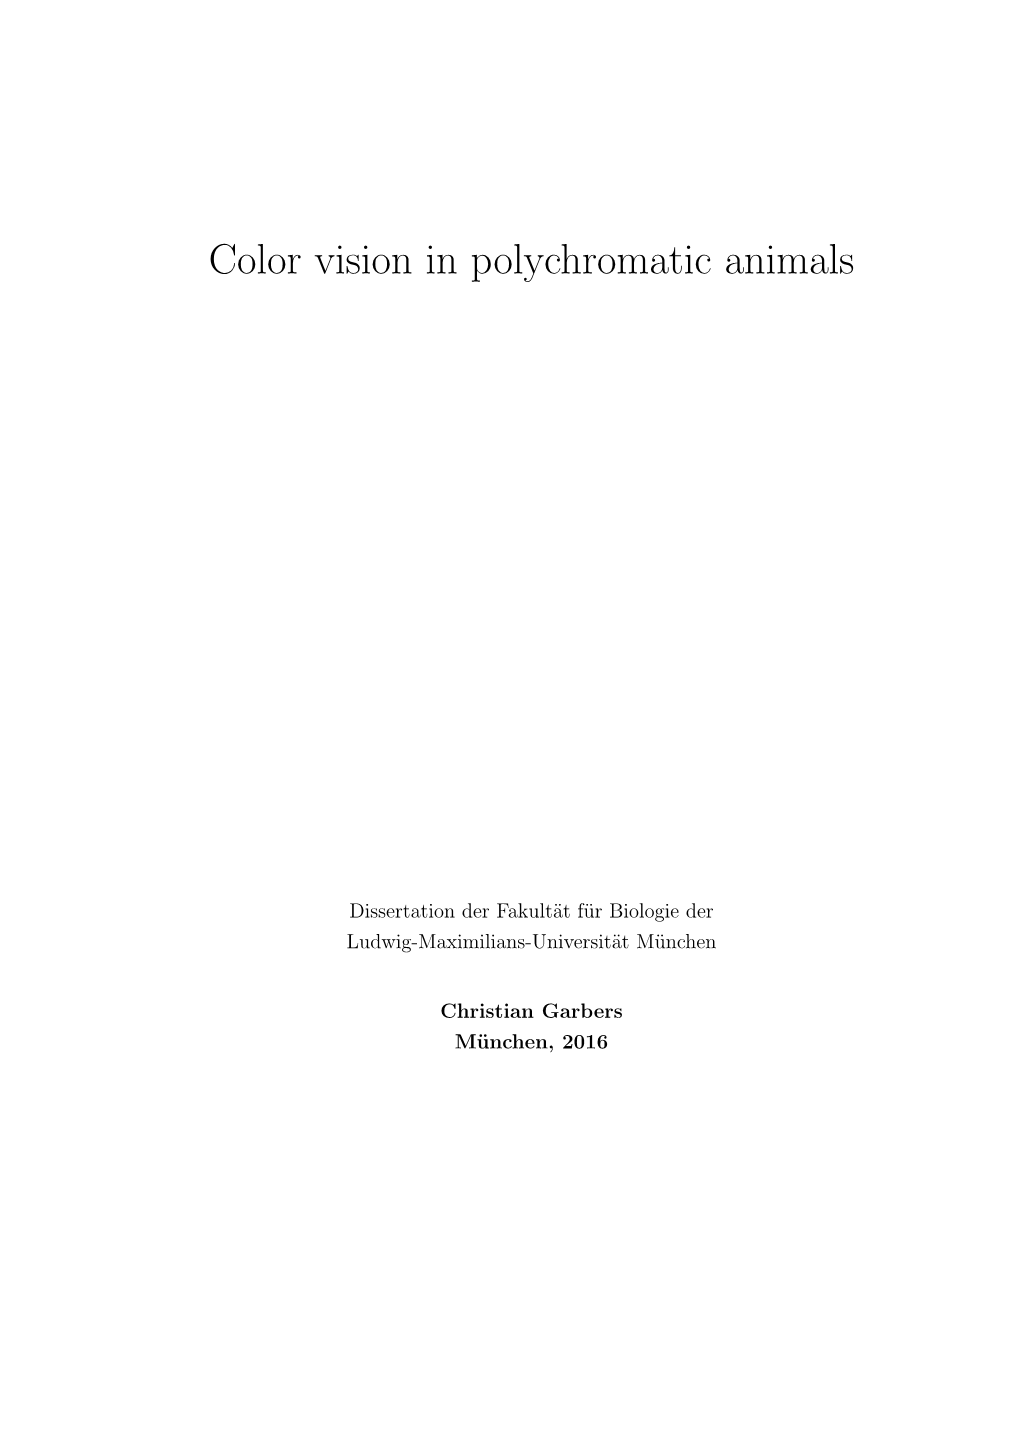 Color Vision in Polychromatic Animals